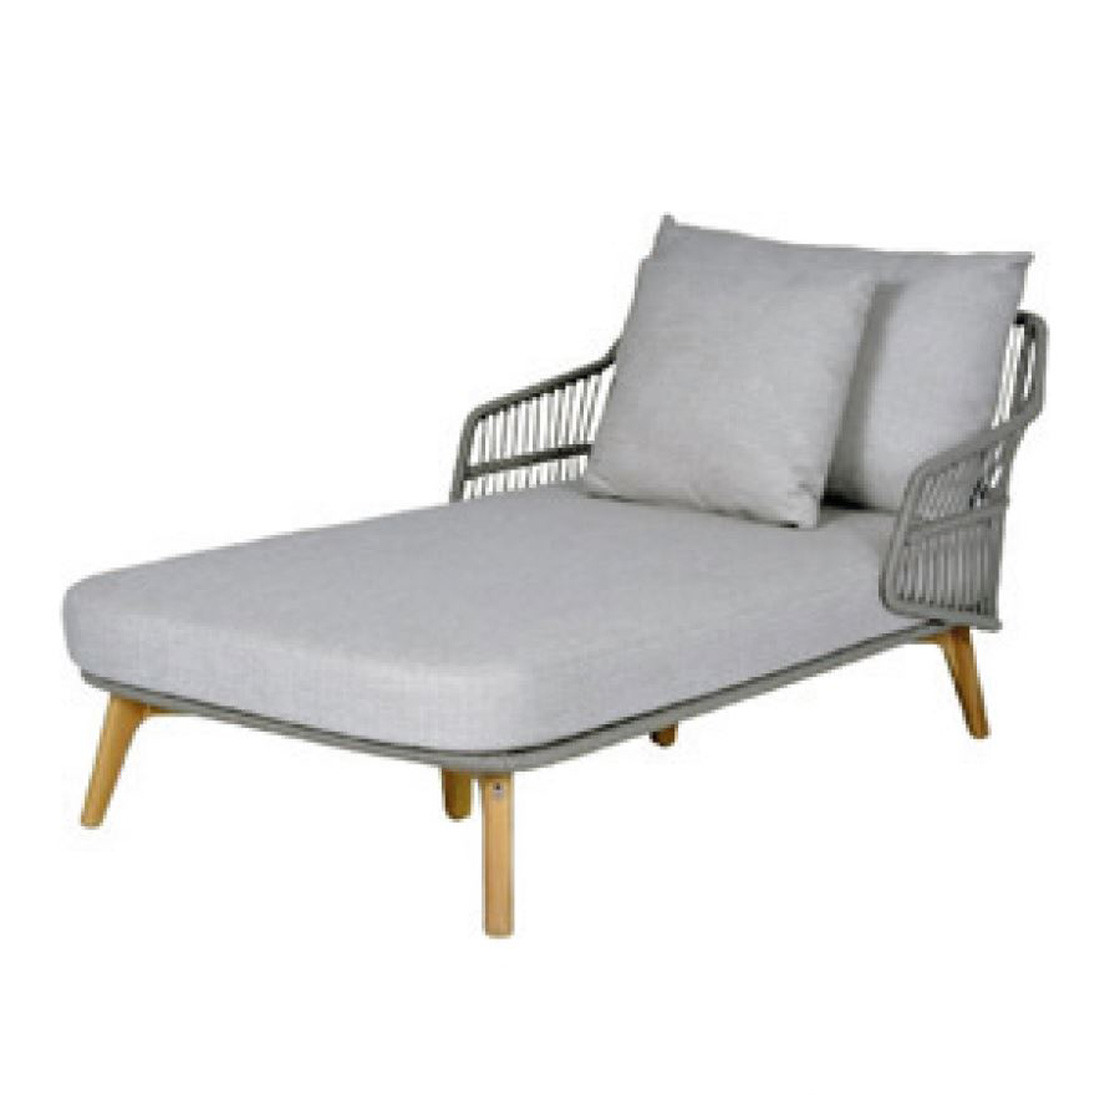 Sempre daybed teak silvergrey 1 seater with 3 cushions